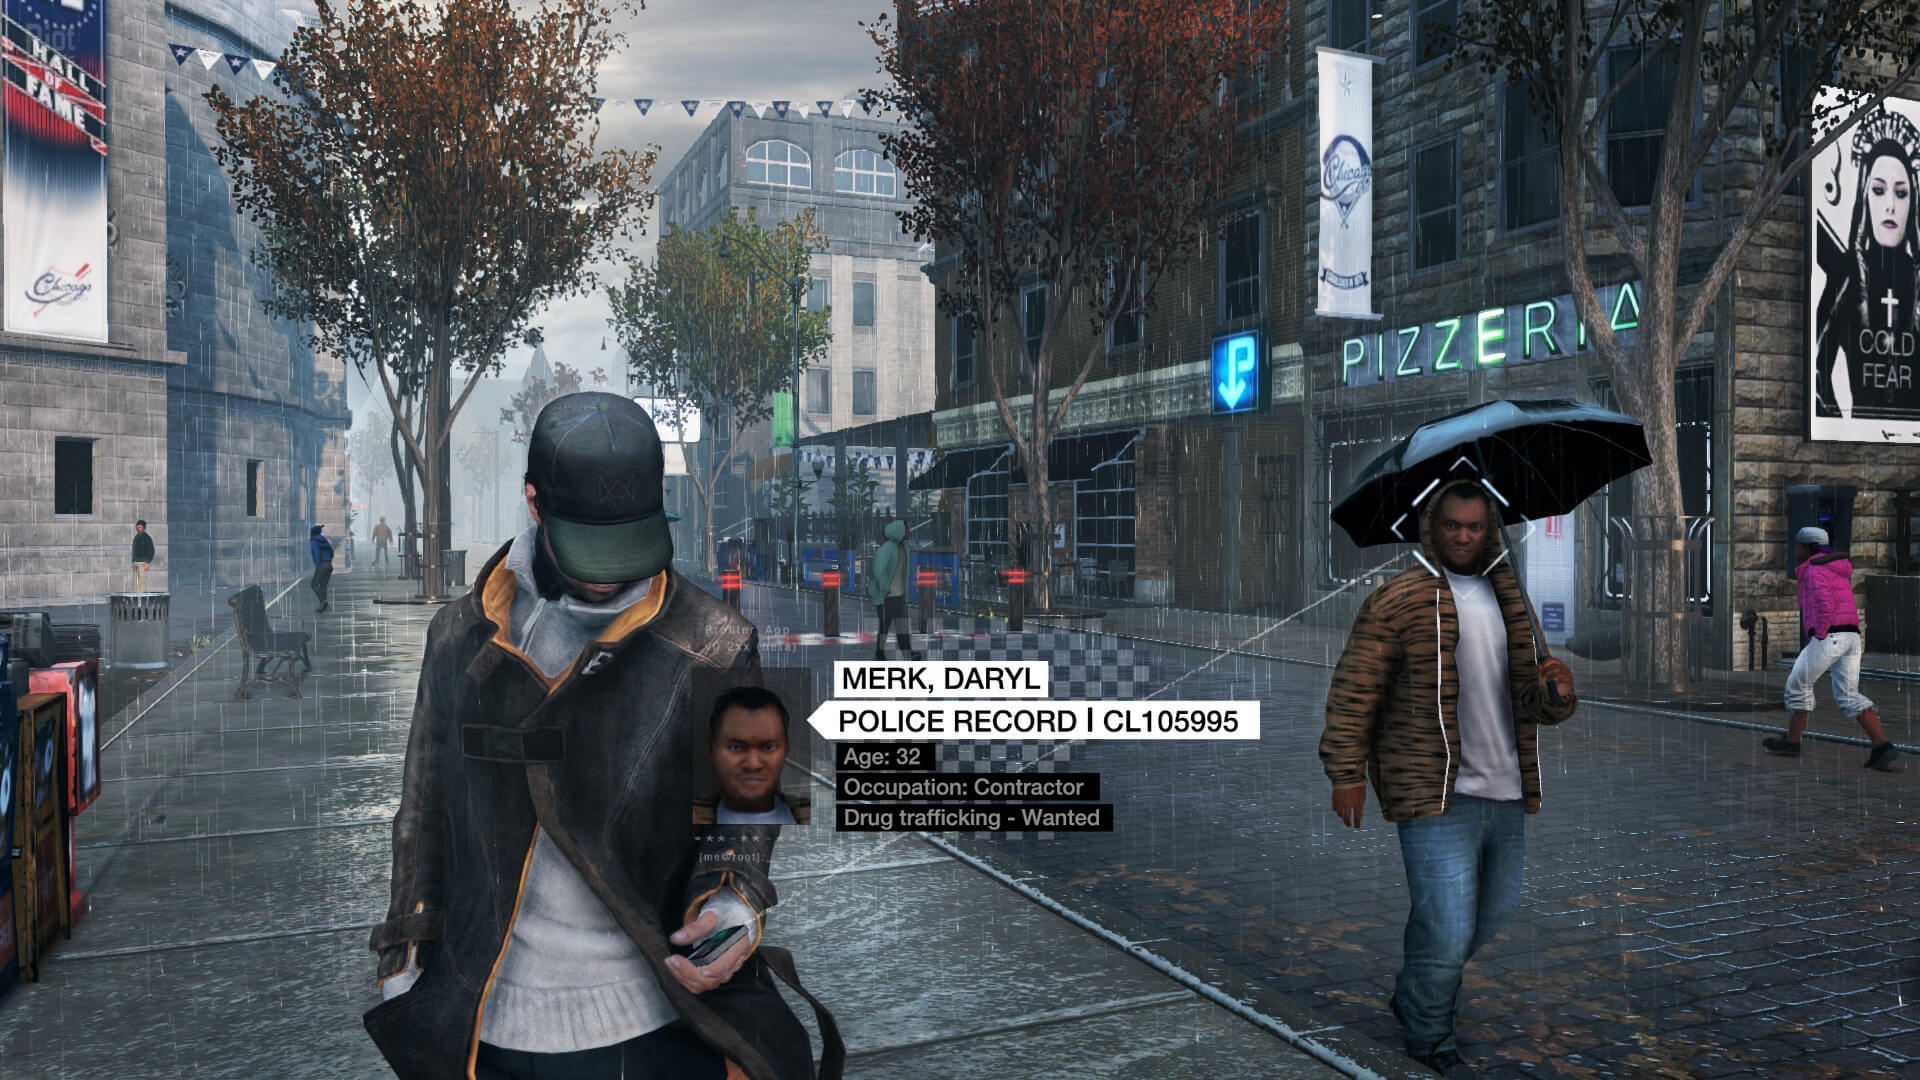 Download Watch Dogs Full PC Game Highly Compressed in 500 MB Parts - TraX Gaming Center